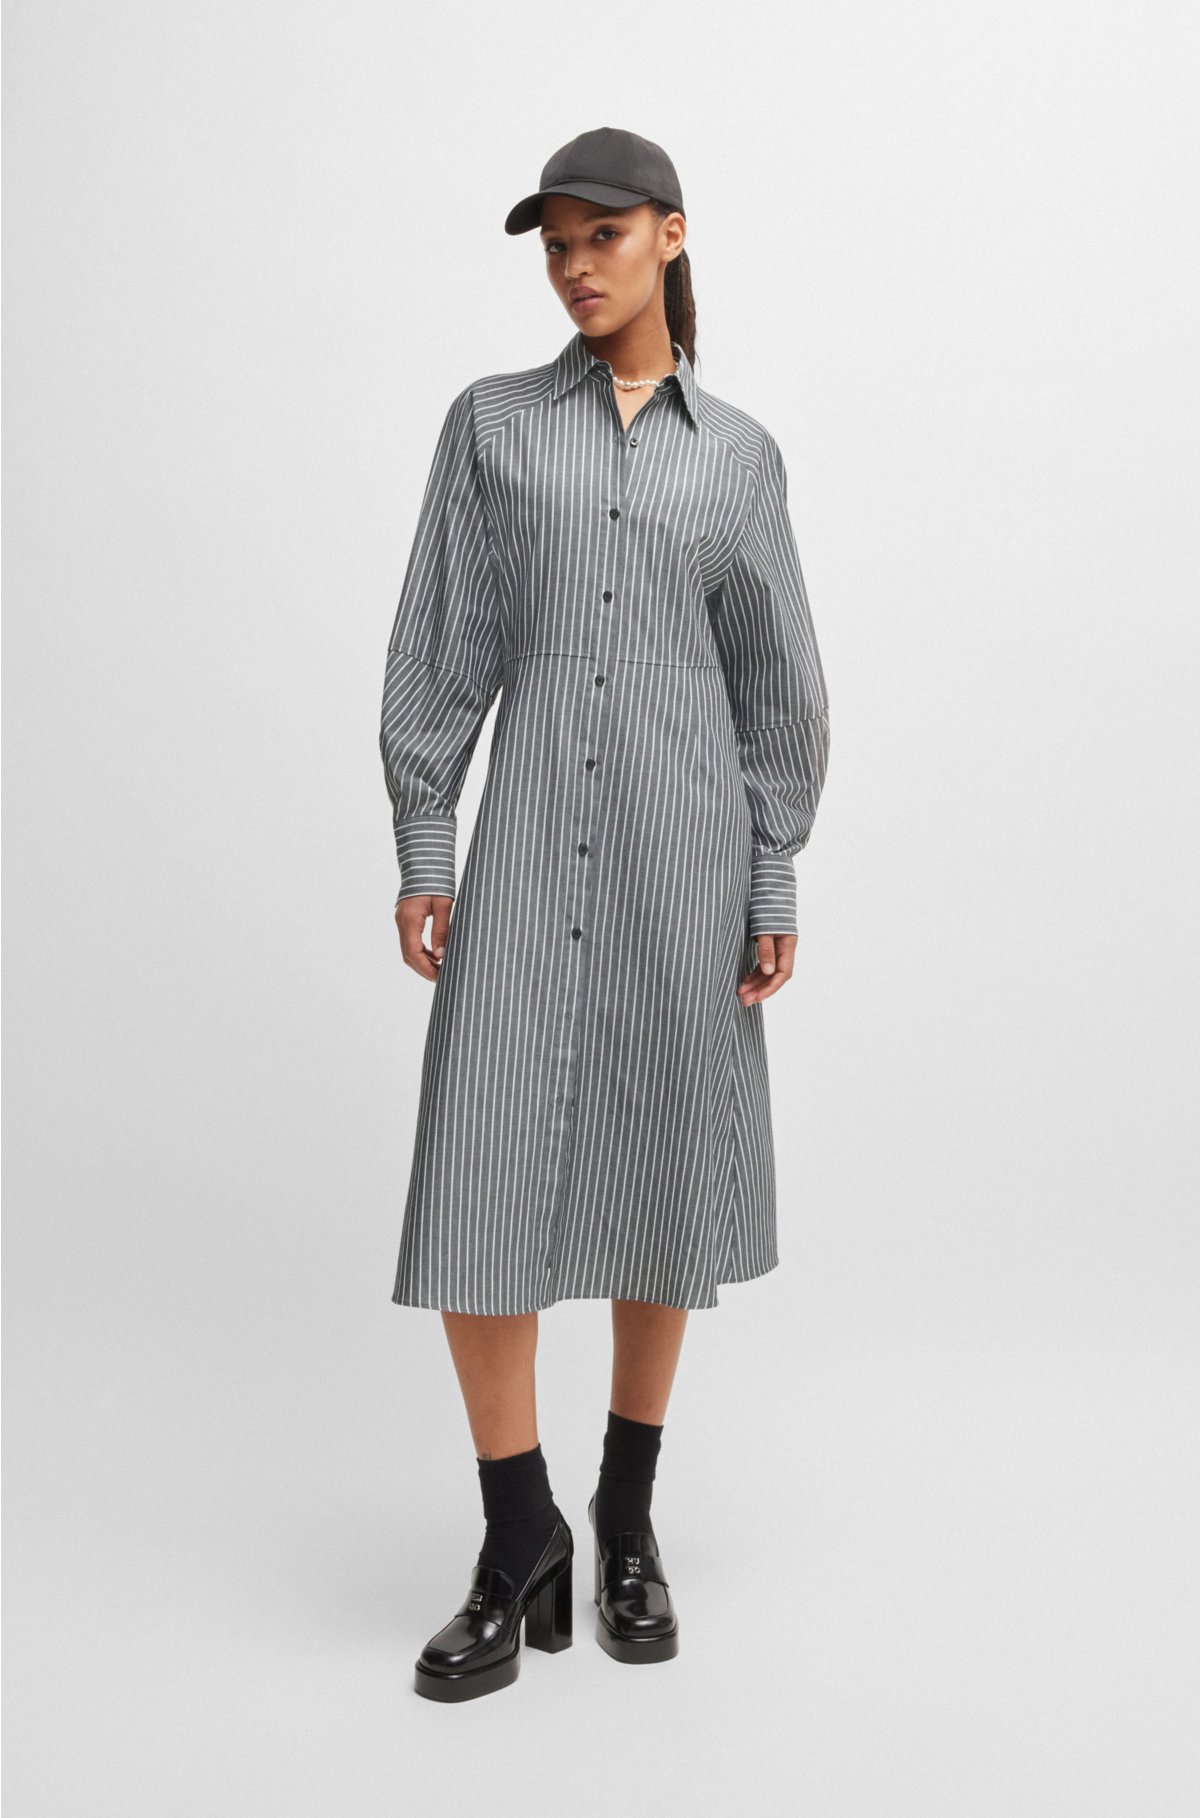 Long-sleeved shirt dress in striped cotton twill, Grey Patterned